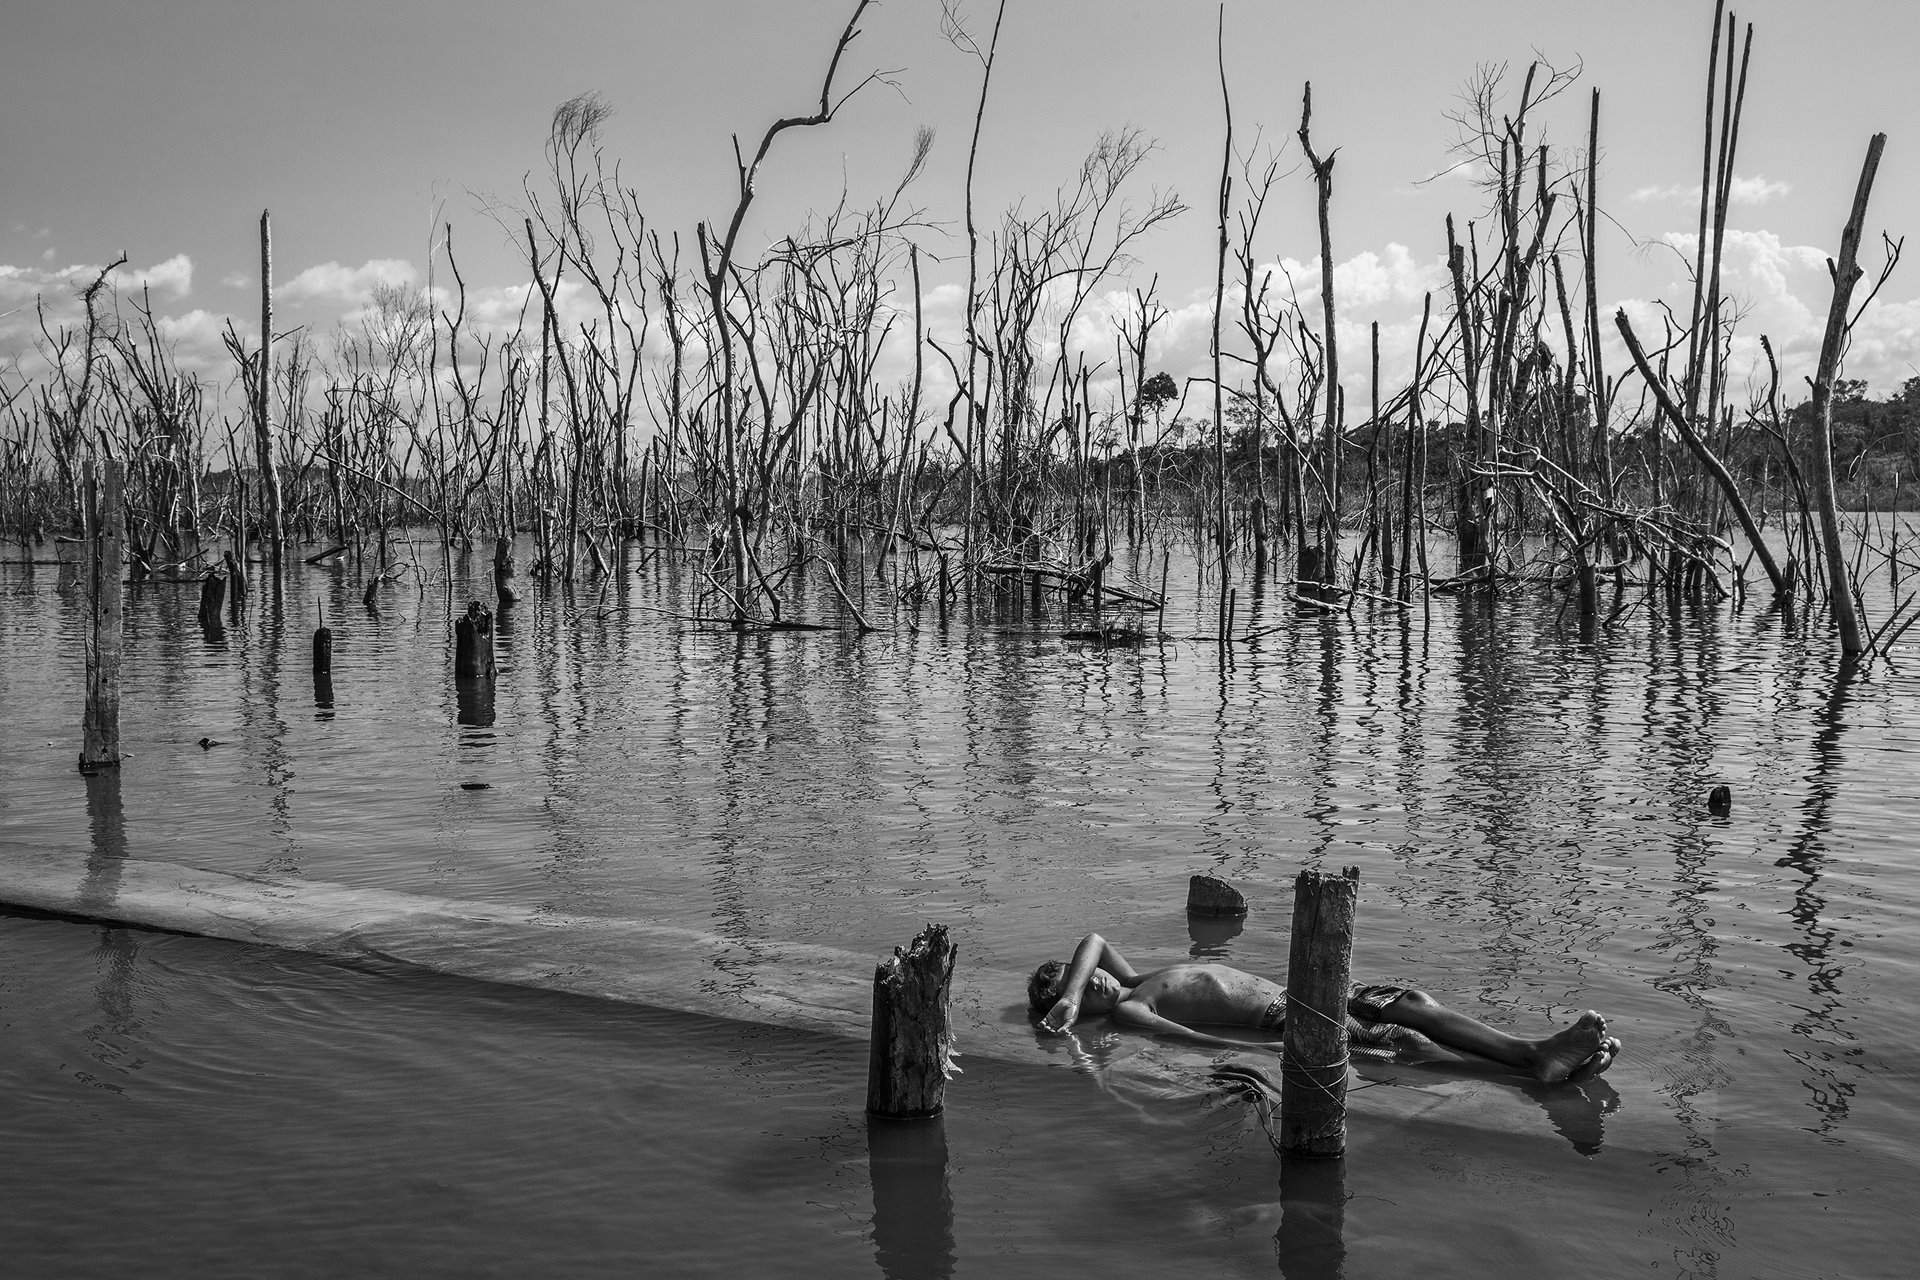 <p>A boy rests on a dead tree trunk in the Xingu River in Paratizão, a community located near the Belo Monte hydroelectric dam, Pará, Brazil. He is surrounded by patches of dead trees, formed after the flooding of the reservoir.</p>
